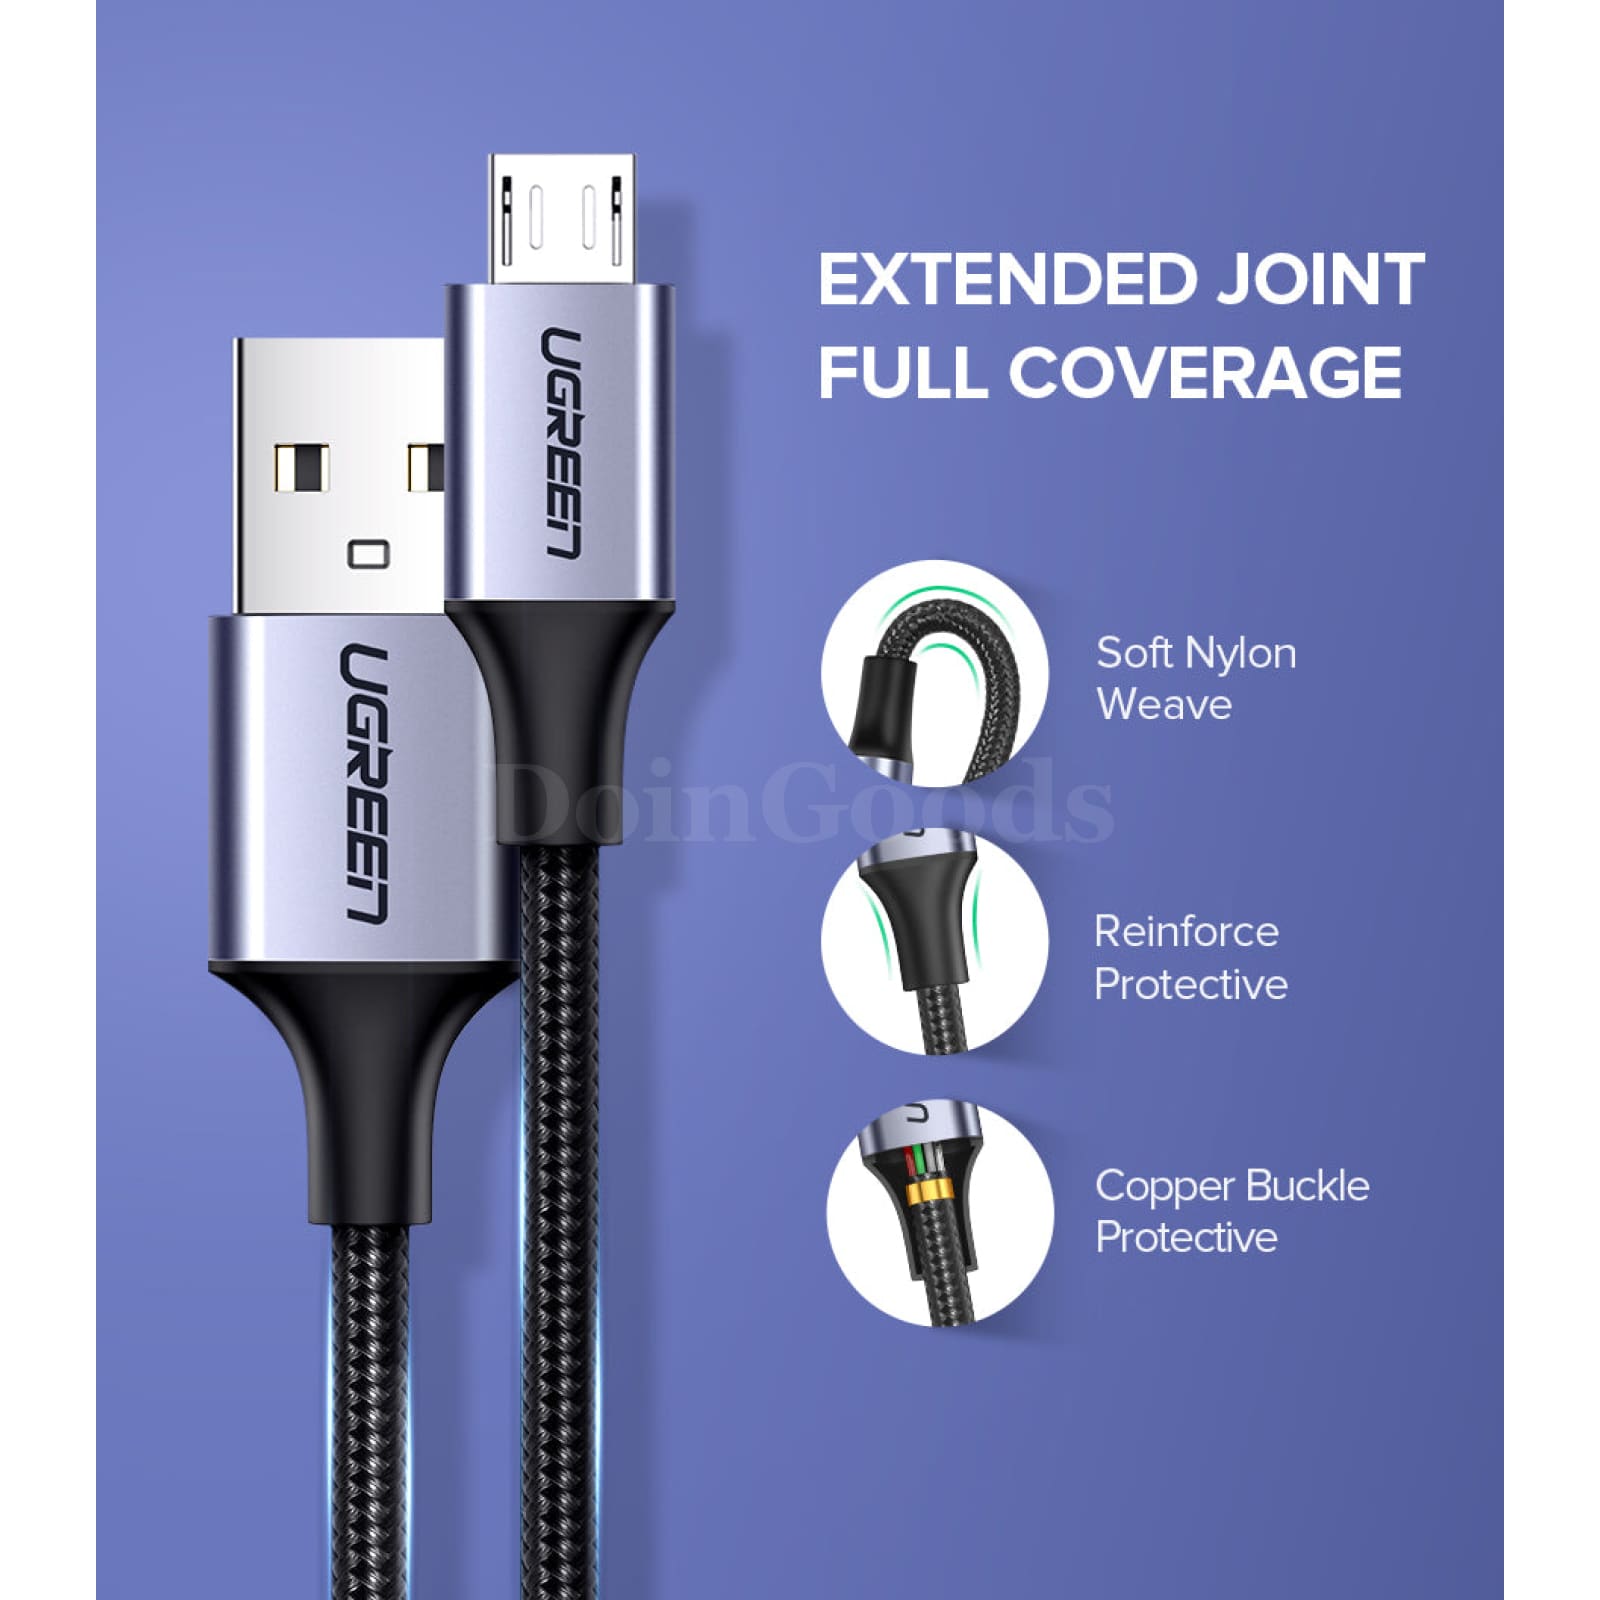 Ugreen Usb 2.0 A To Micro B Cable Charger Short Flexible Fast Charge High Speed 301635